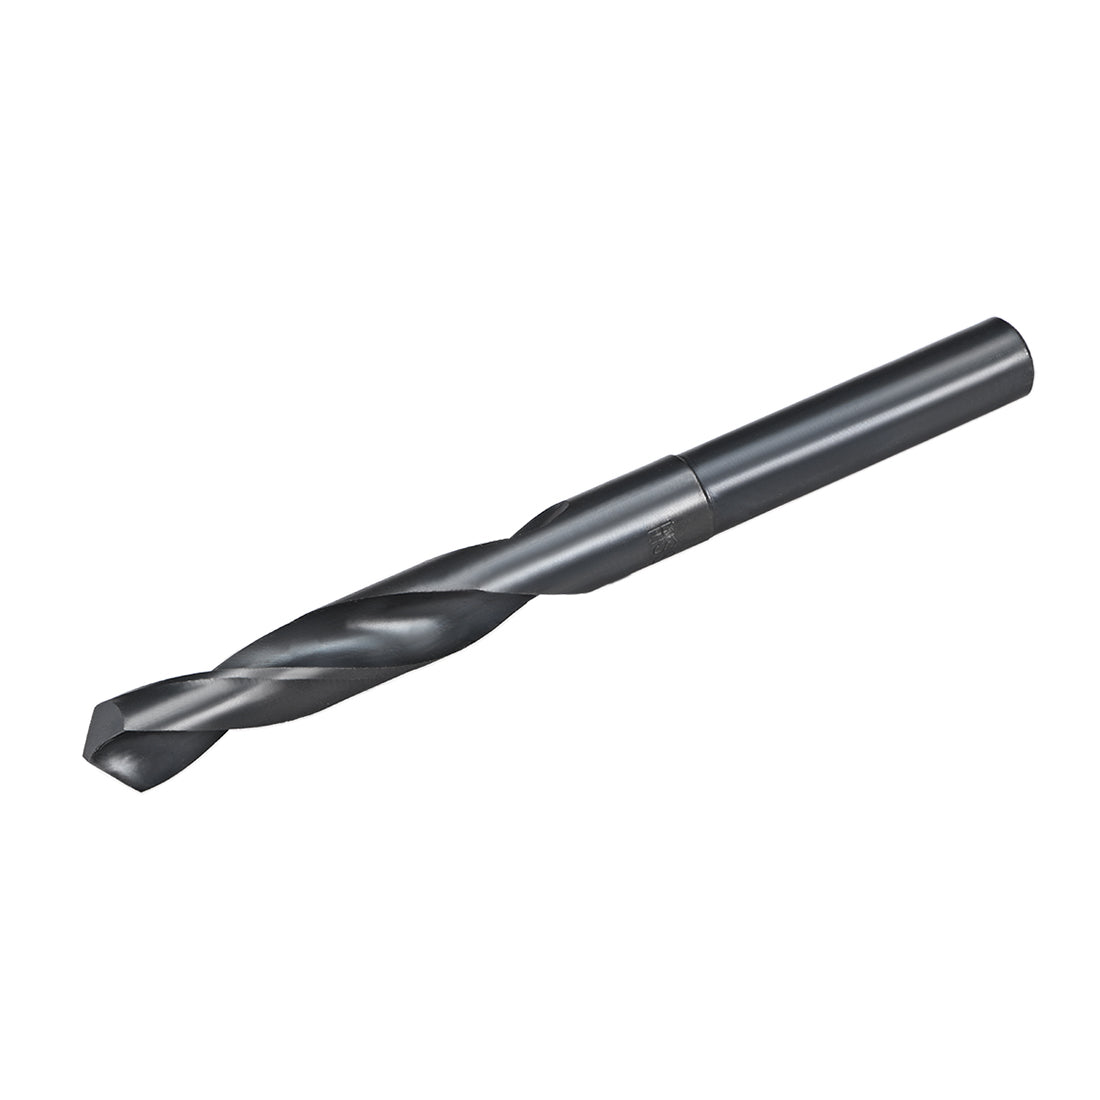 uxcell Uxcell Reduced Shank Drill Bit 13.5mm HSS 6542 Black Oxide with 1/2 Inch Straight Shank